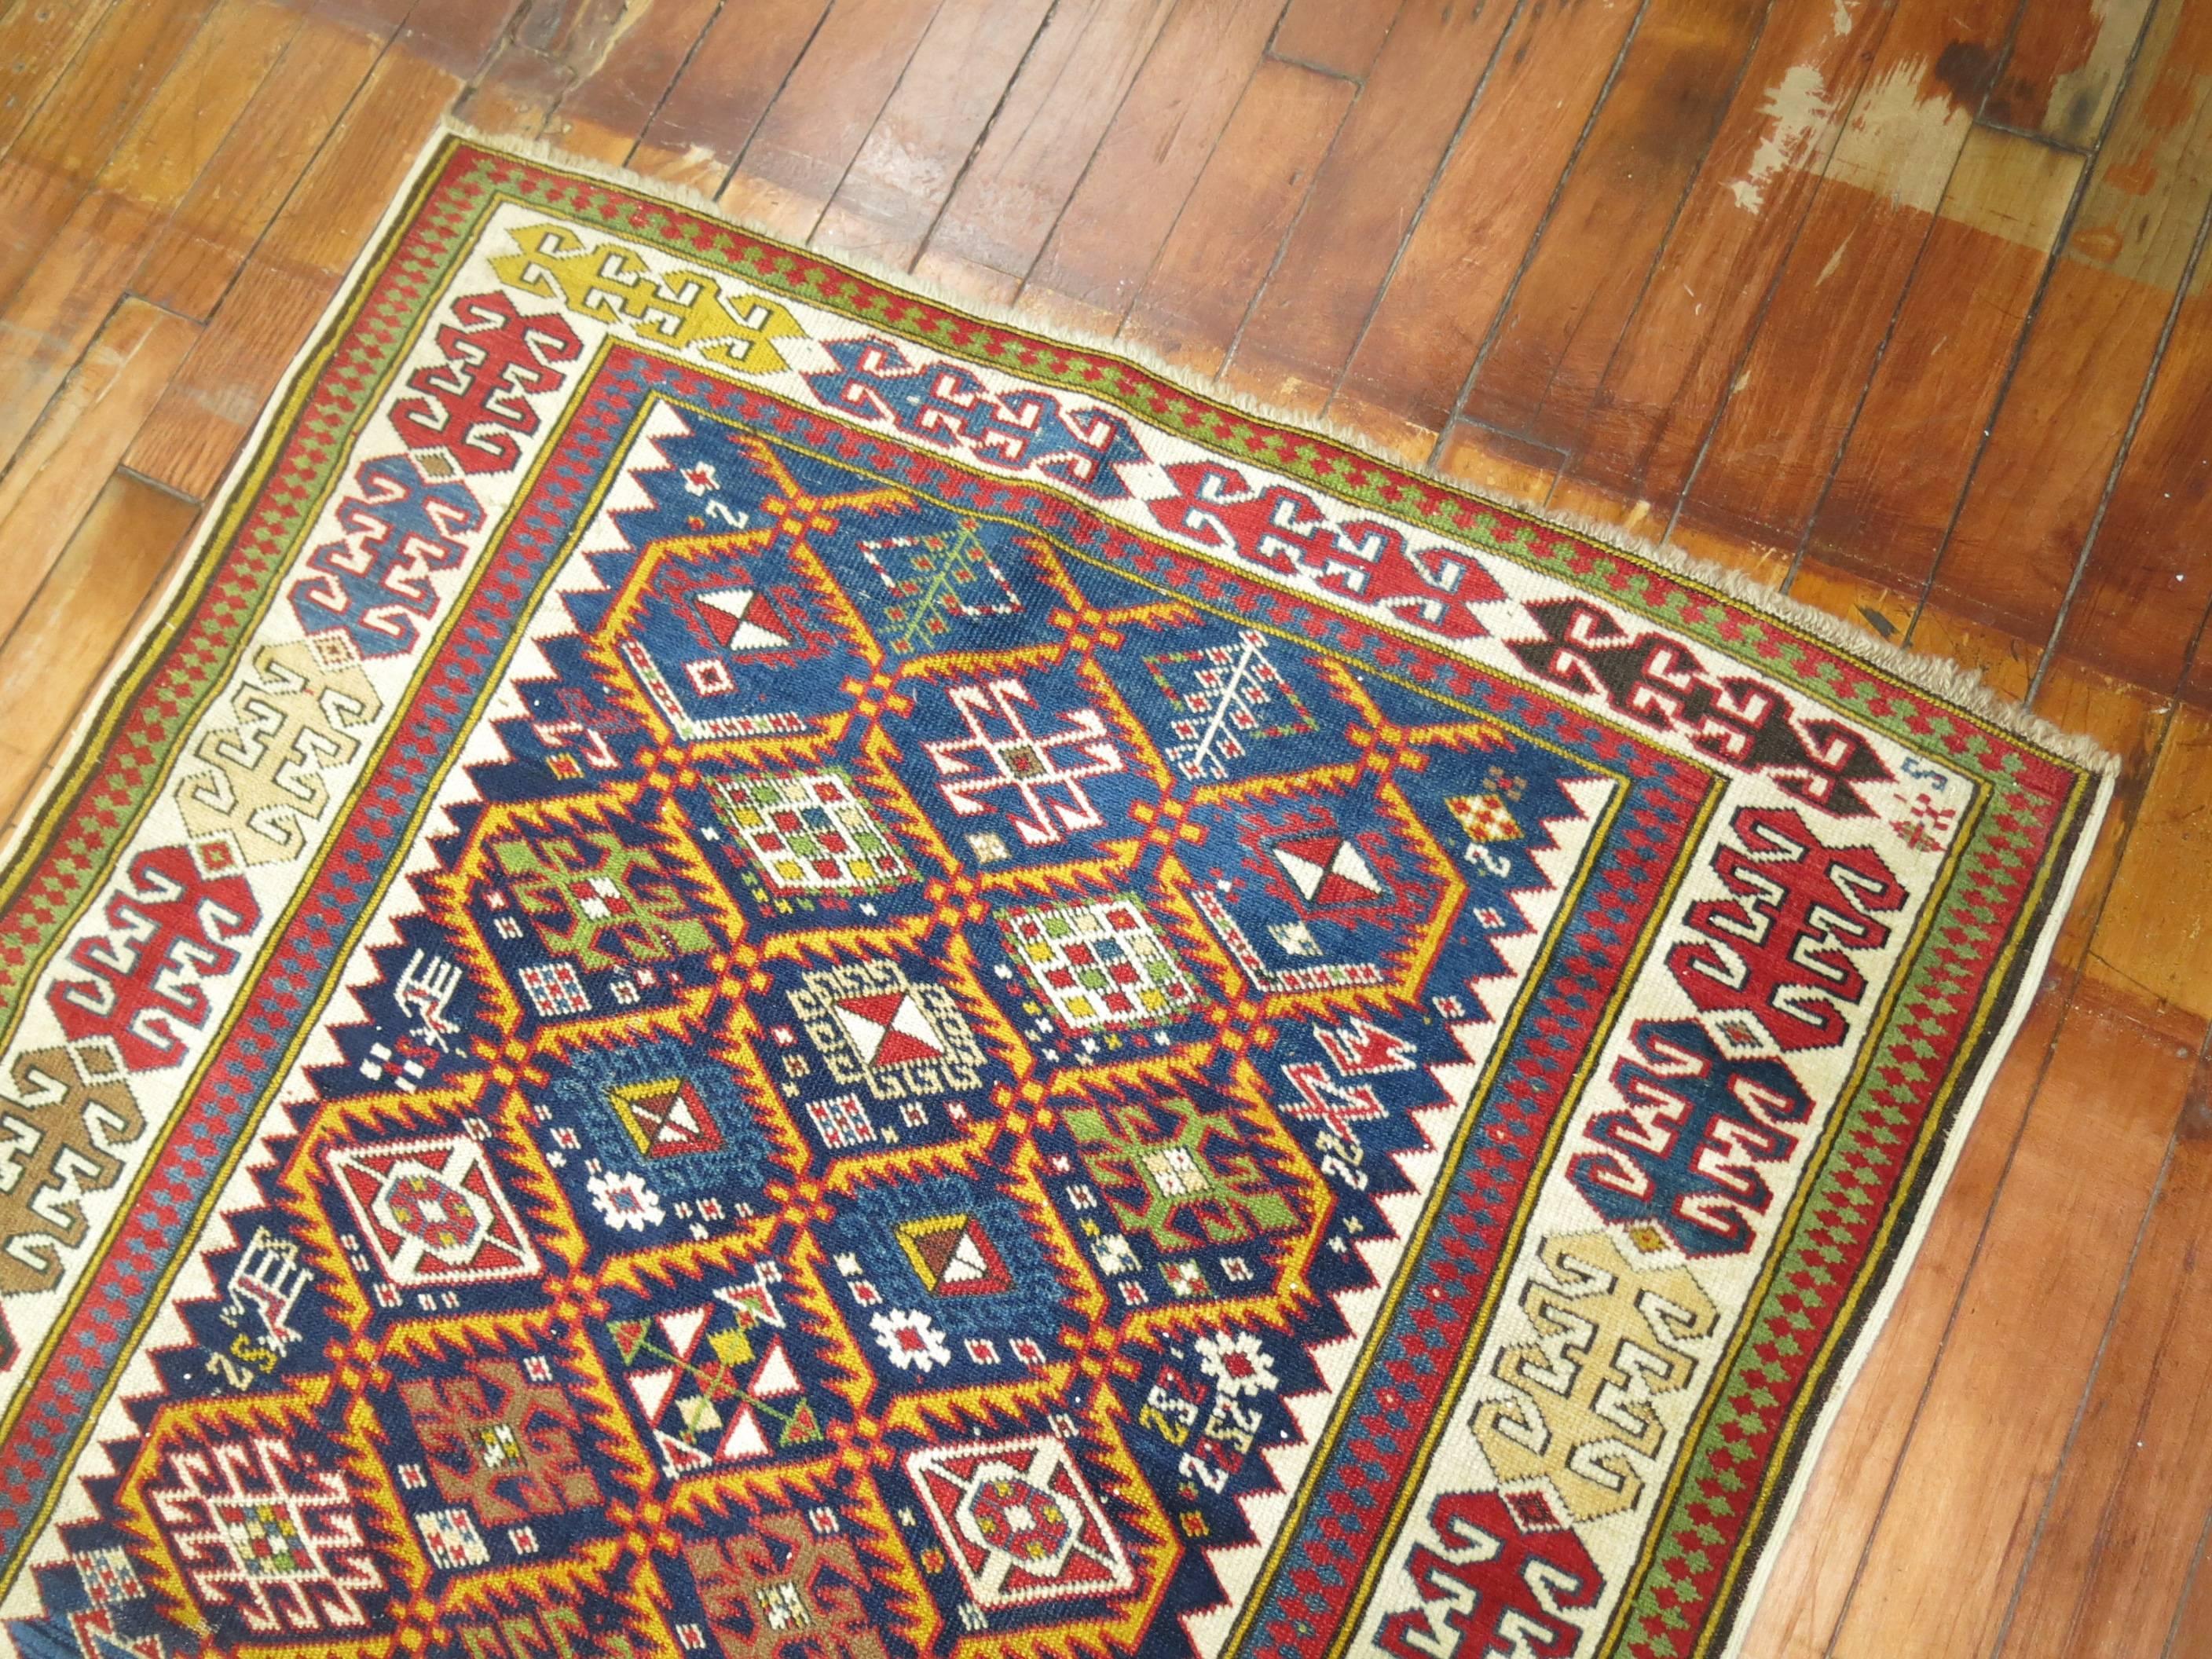 An early 20th century Caucasian Akstafa rug.

Antique Caucasian rugs from the Shirvan district village of Akstafa are among the rarest types of rugs from that region. Similar to Kazak carpets, Akstafa rugs often featured a limited palette of navy,